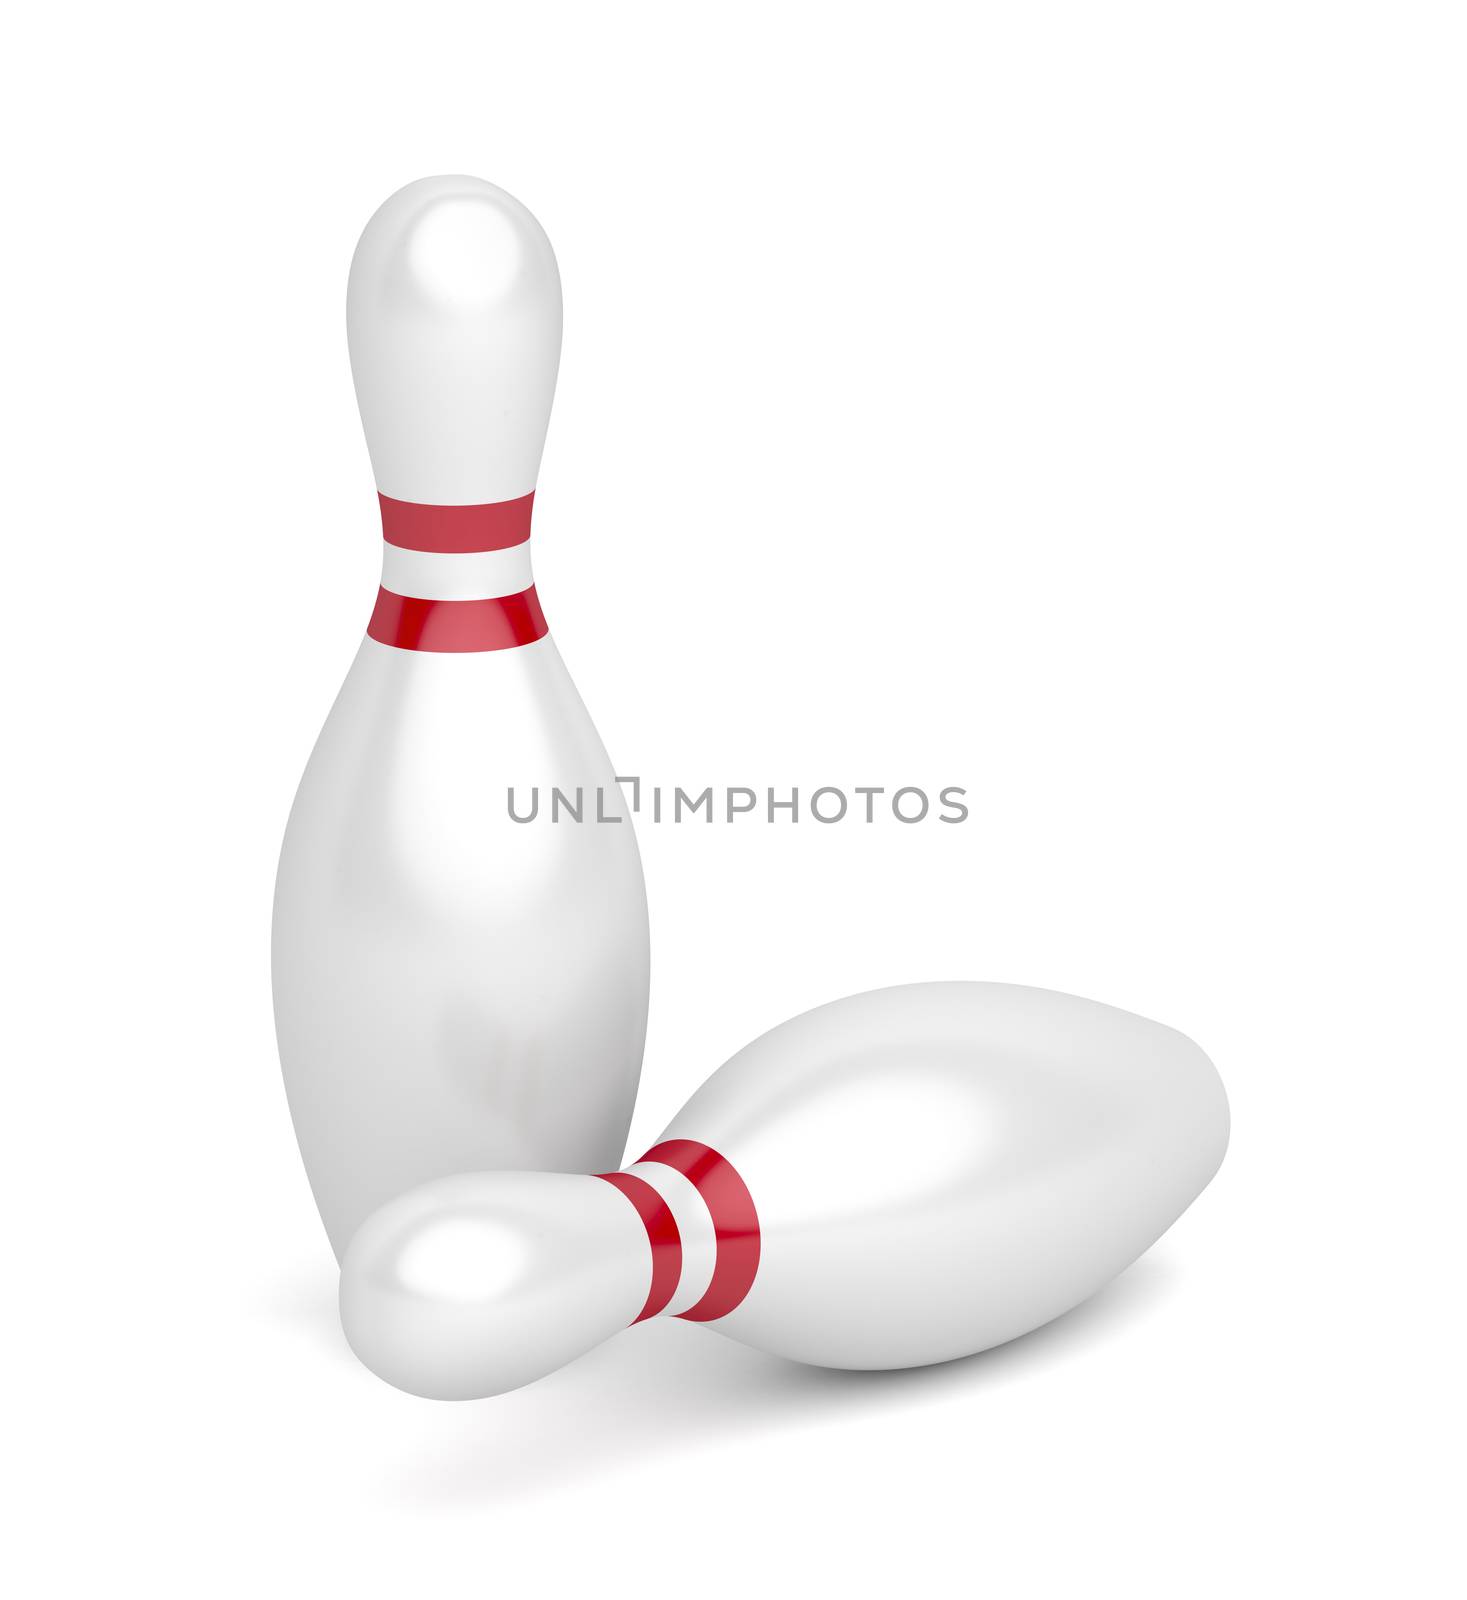 Two bowling pins on white background